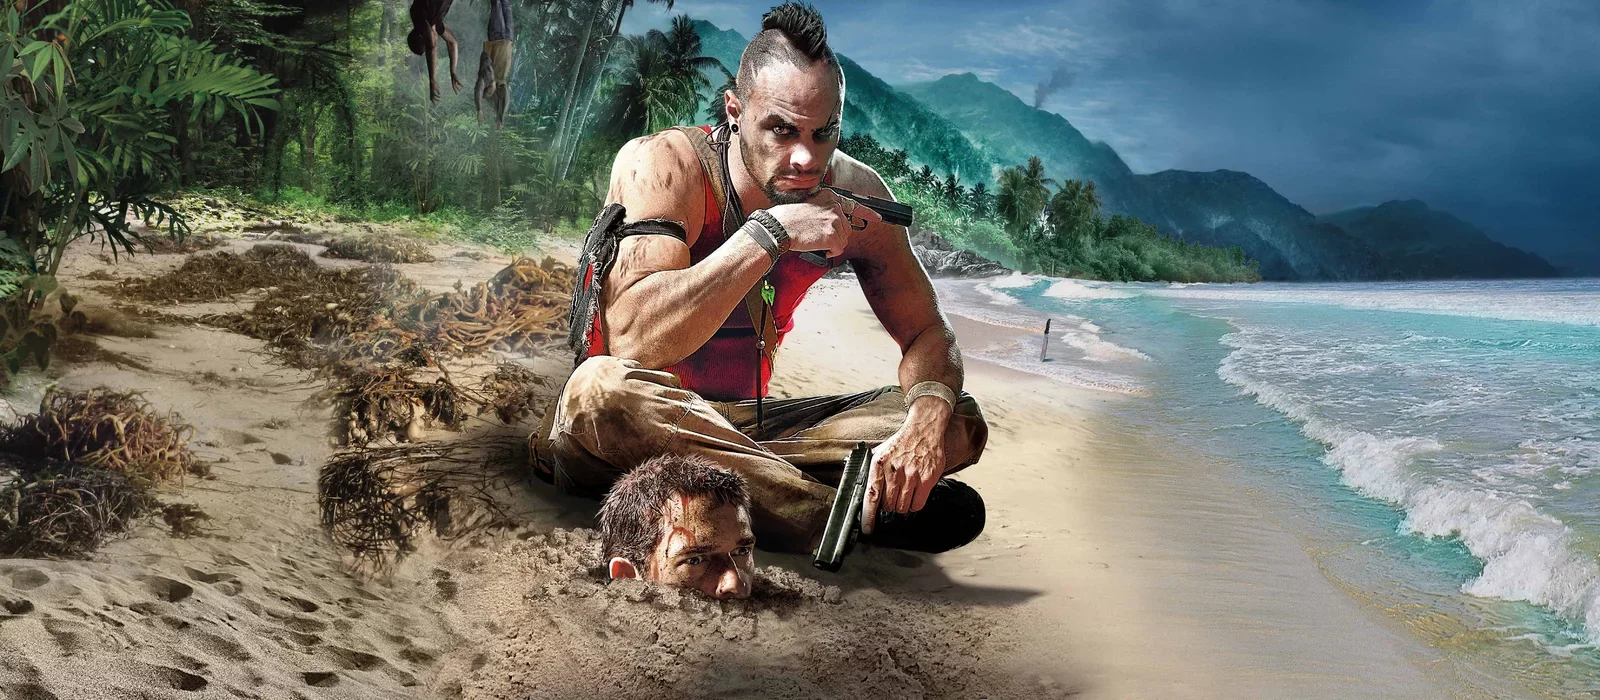 A hardcore multiplayer shooter is coming to the Far Cry franchise